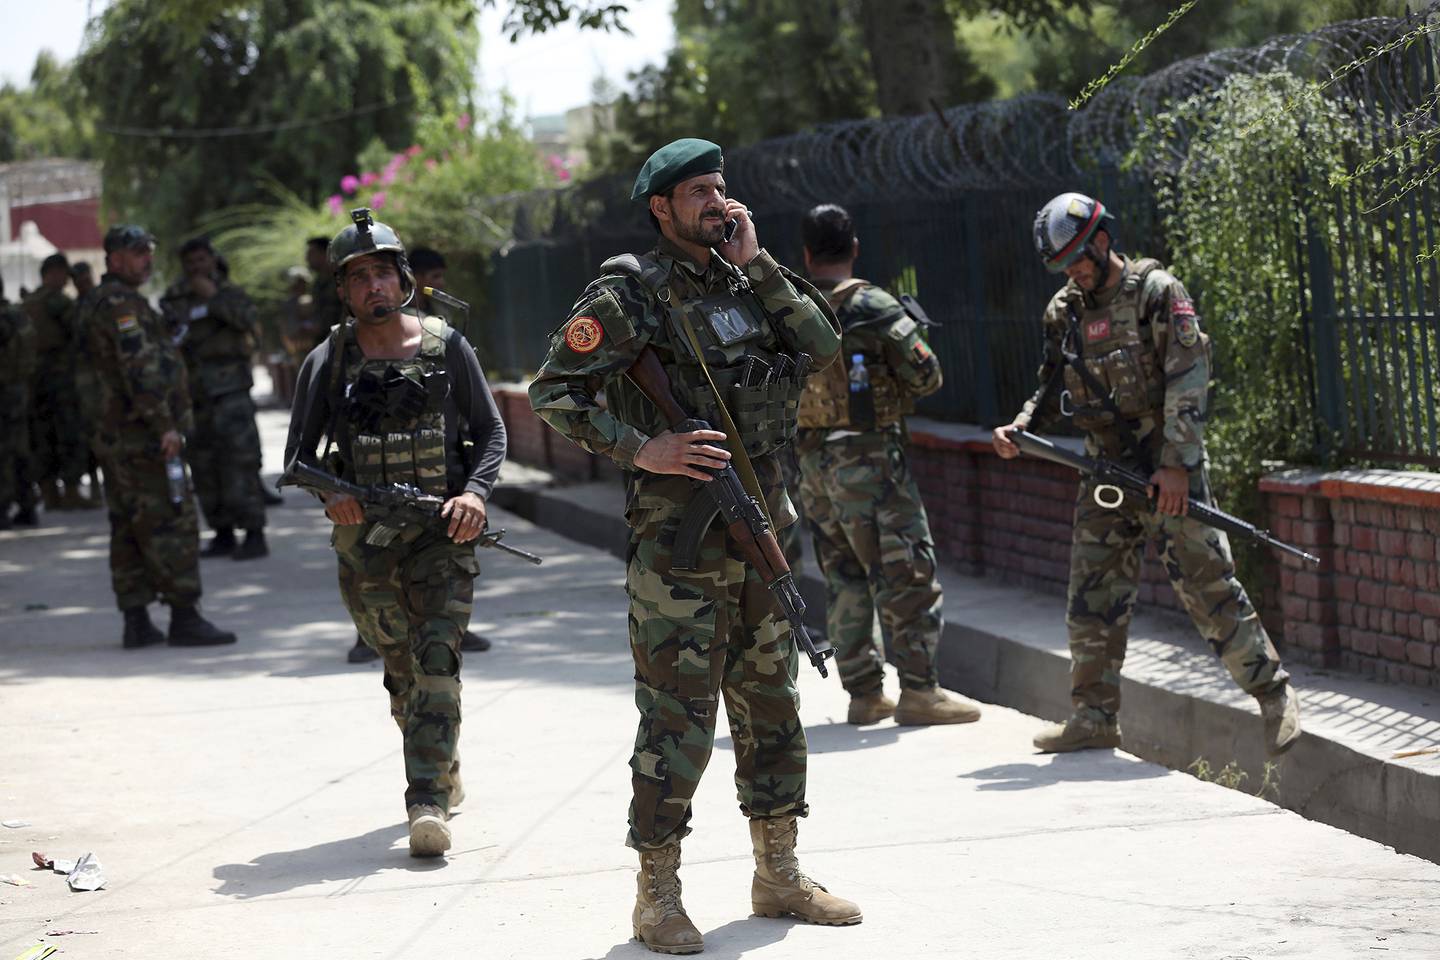 Afghan security personnel gather near a prison after an attack in the city of Jalalabad, east of Kabul, Afghanistan, Monday, Aug. 3, 2020.